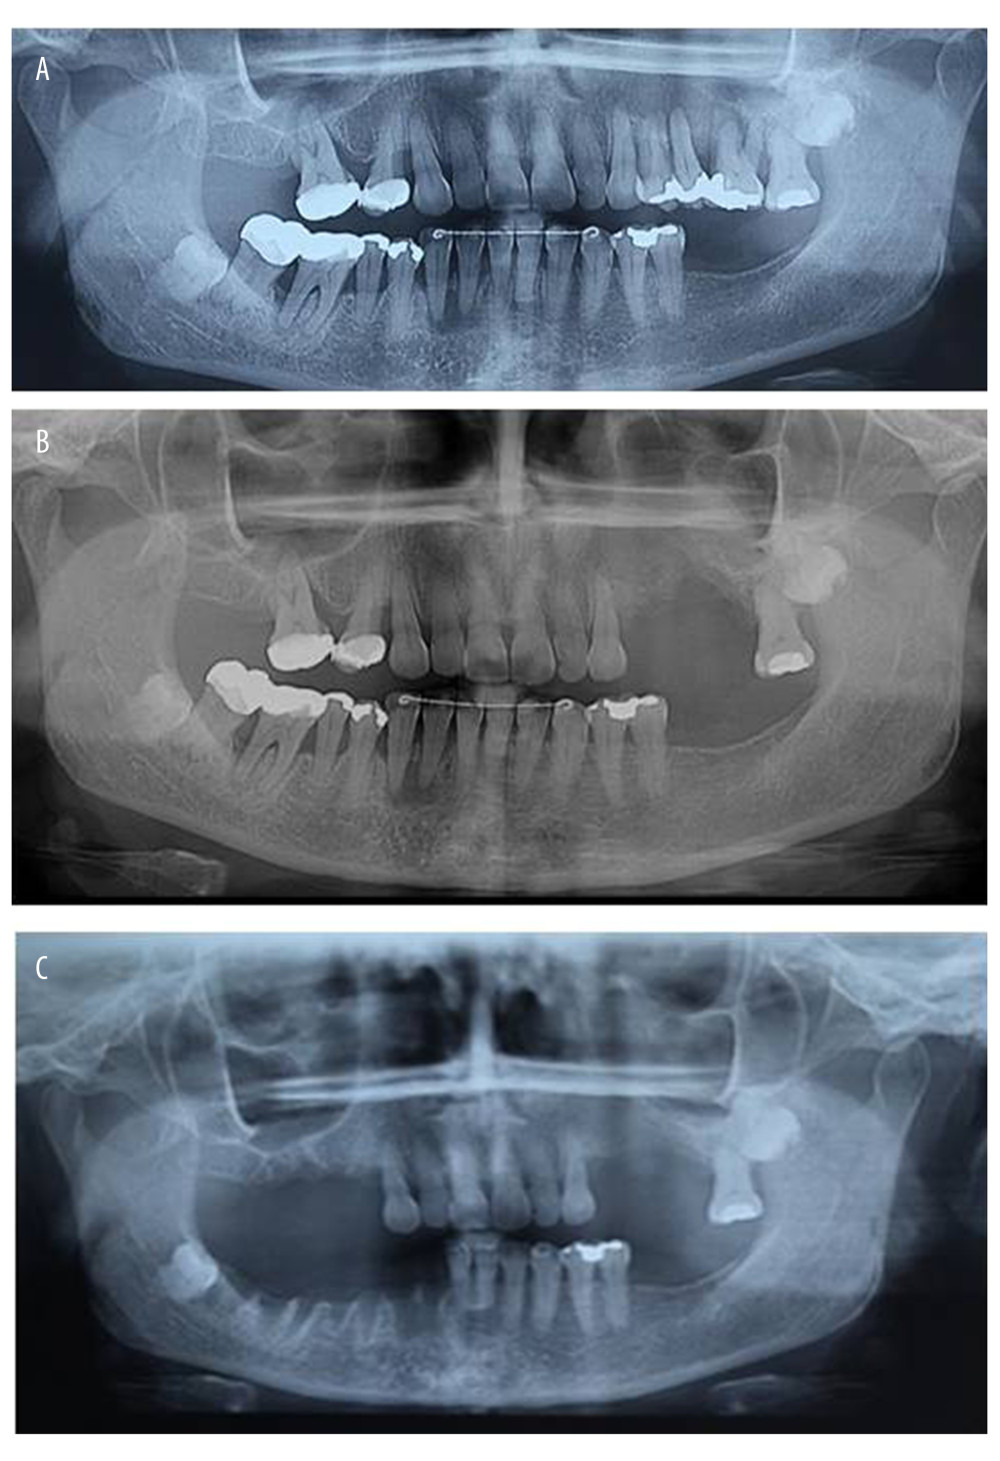 (A) Initial panoramic radiography, showing a radiolucent nondelimited area in the region of the 24, 25, and 26 teeth. (B) Panoramic radiography after the extraction of the teeth. The radiolucent area was recovered. (C) Control panoramic radiography; the lesion did not recur.